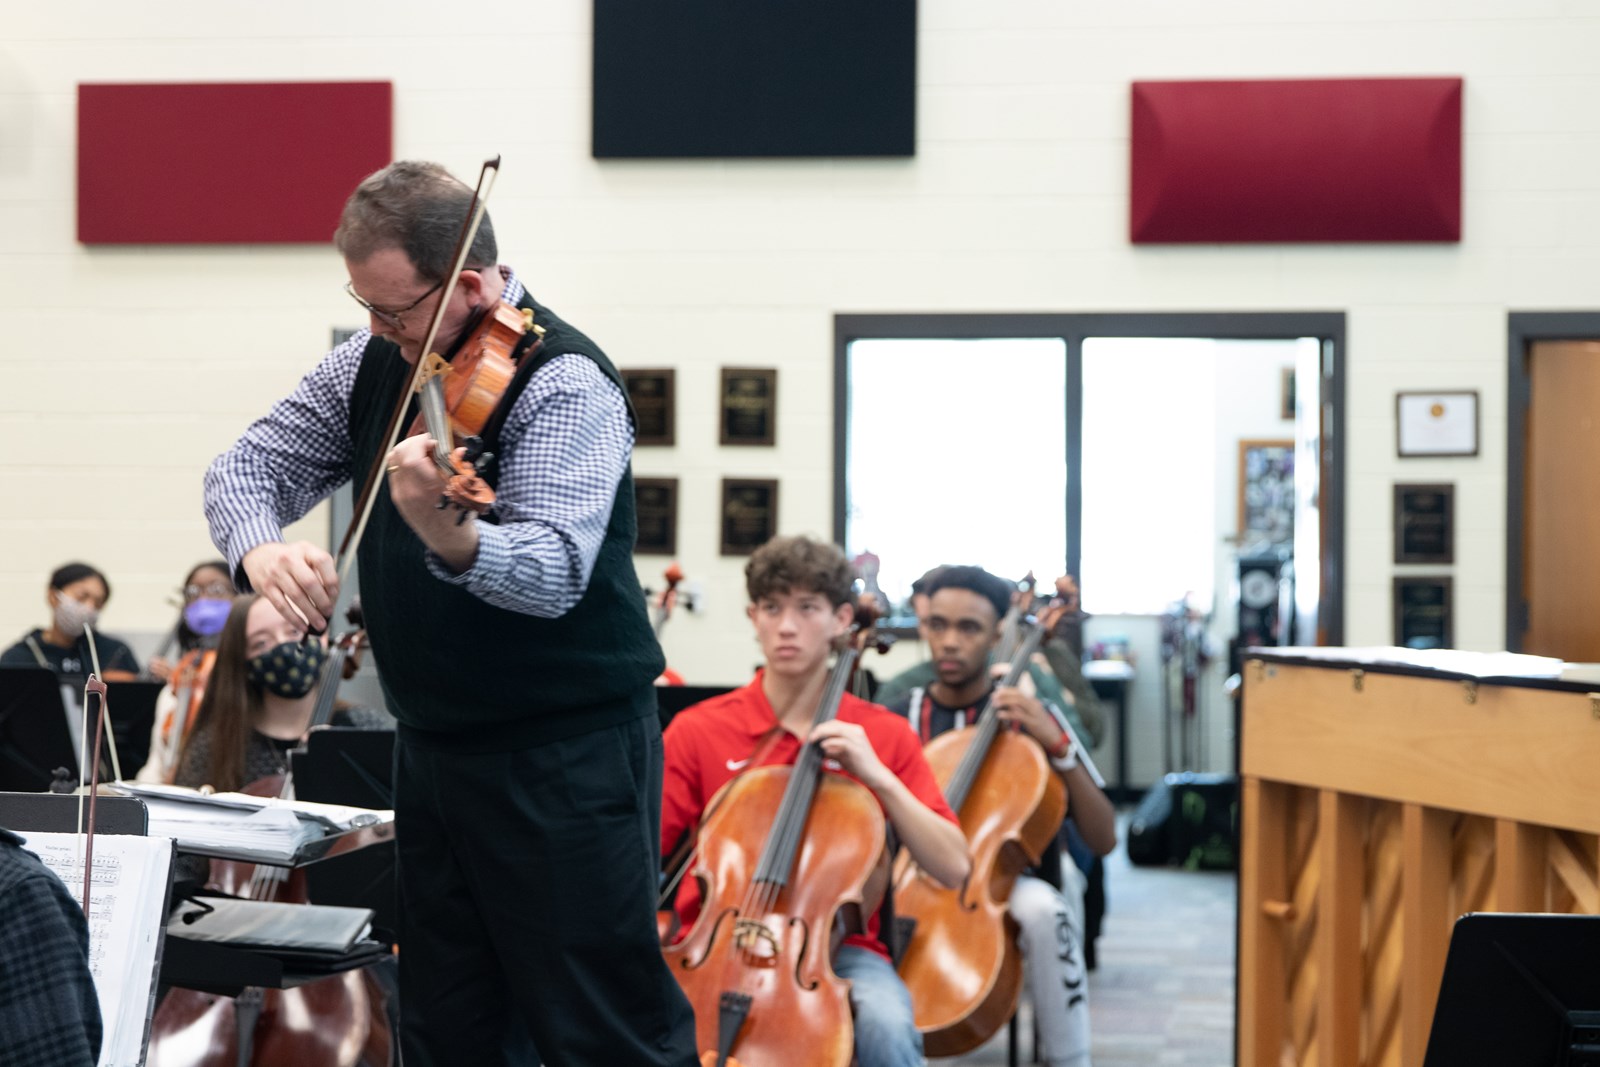 Allatoona%20High%20School%20students%20participate%20in%20James%20Palmer's%20orchestra%20class-34.jpg